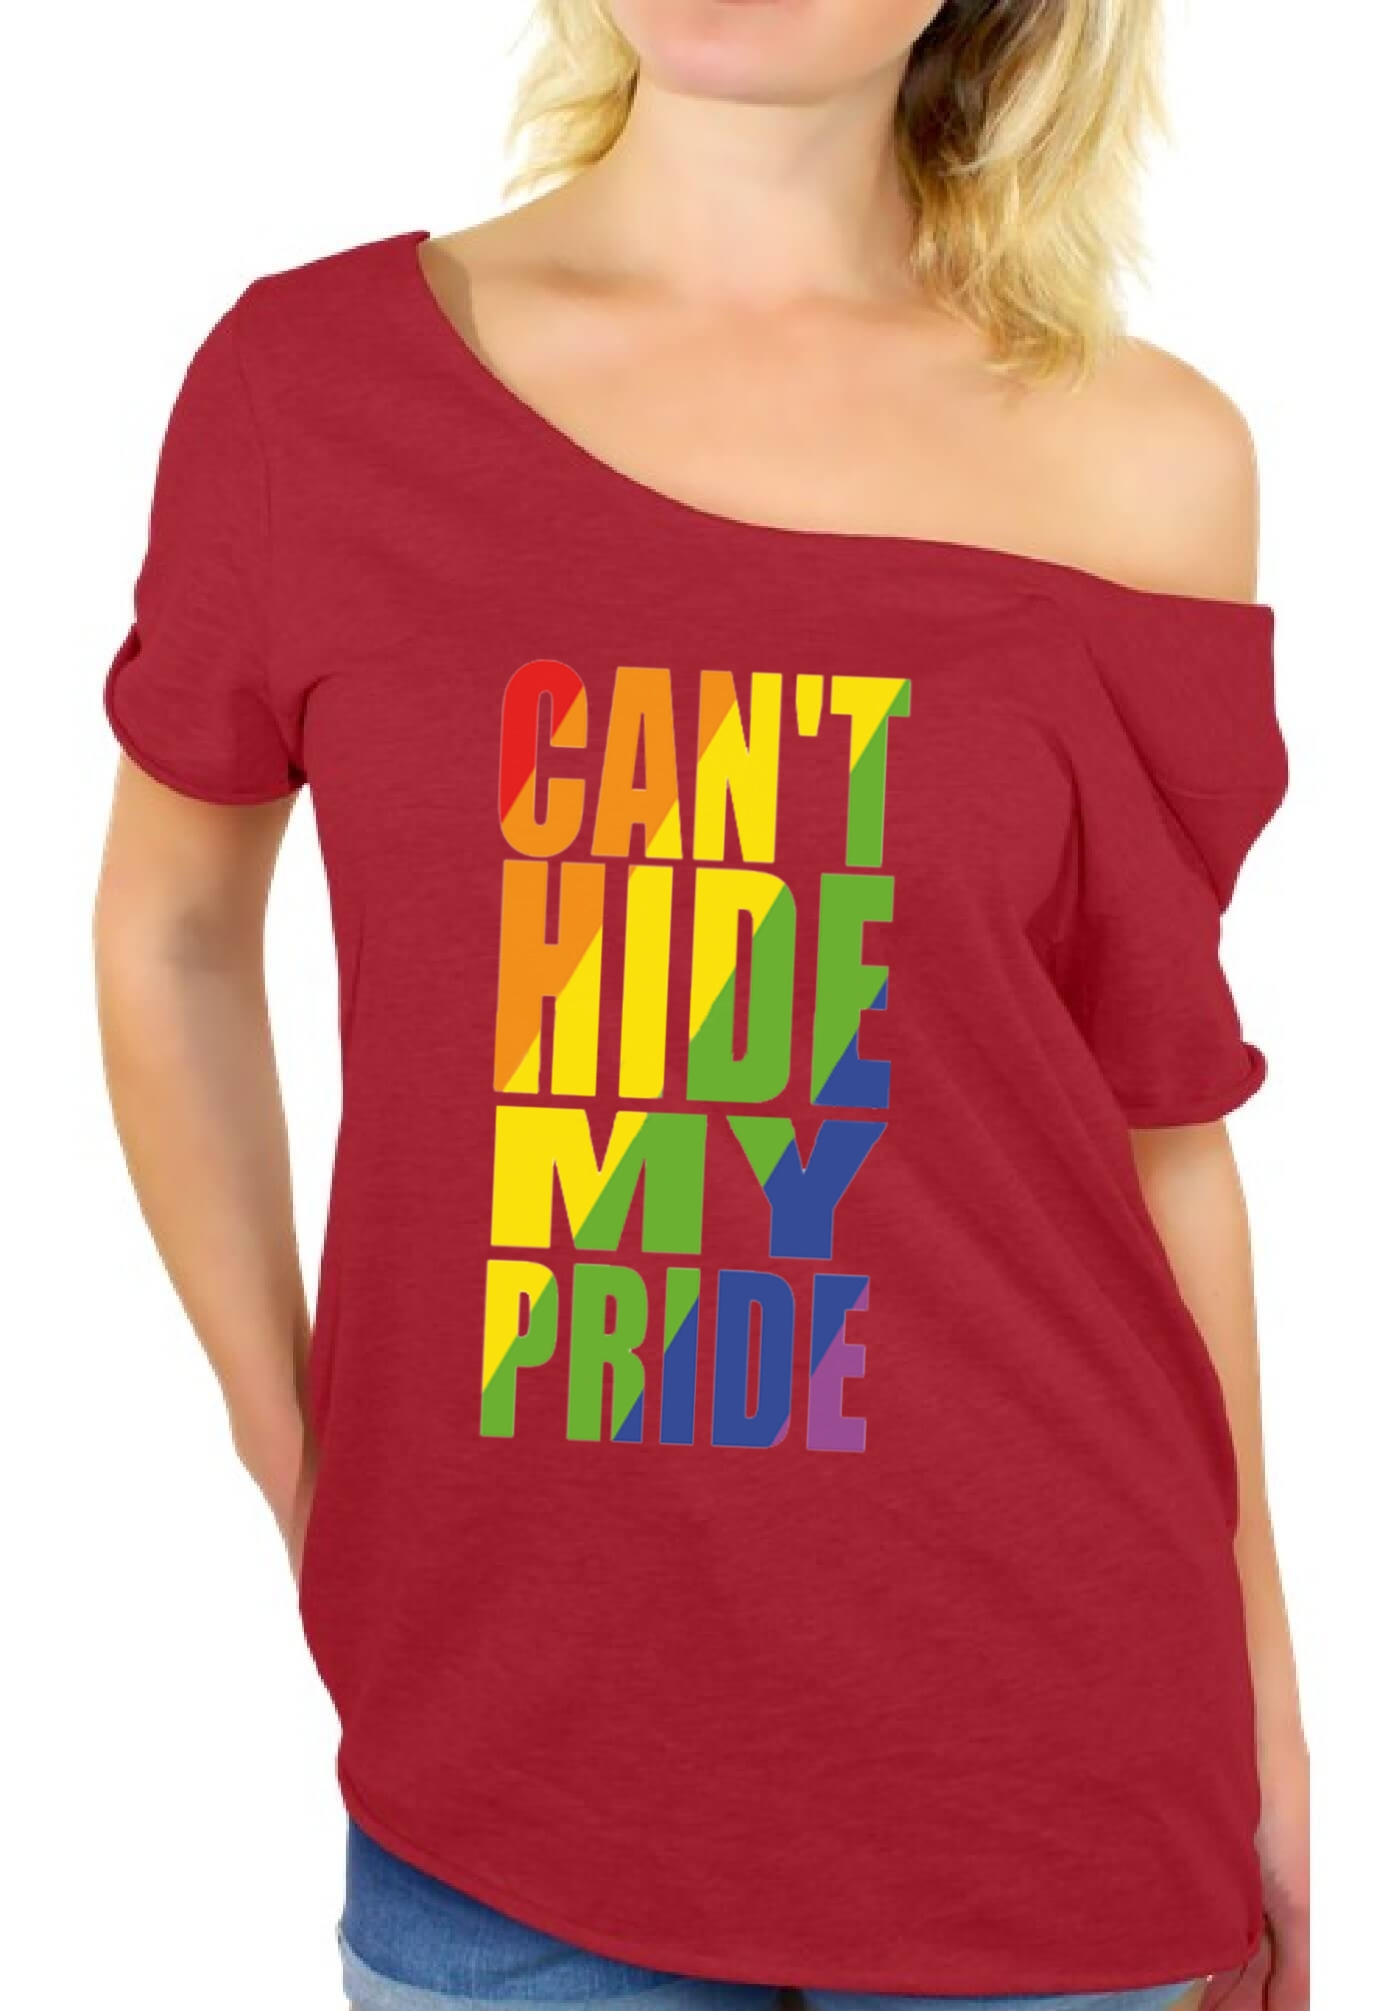 Women S Lgbt Pride Off The Shoulder Tops T Shirts Gay Parade Can T Hide My Pride Ebay